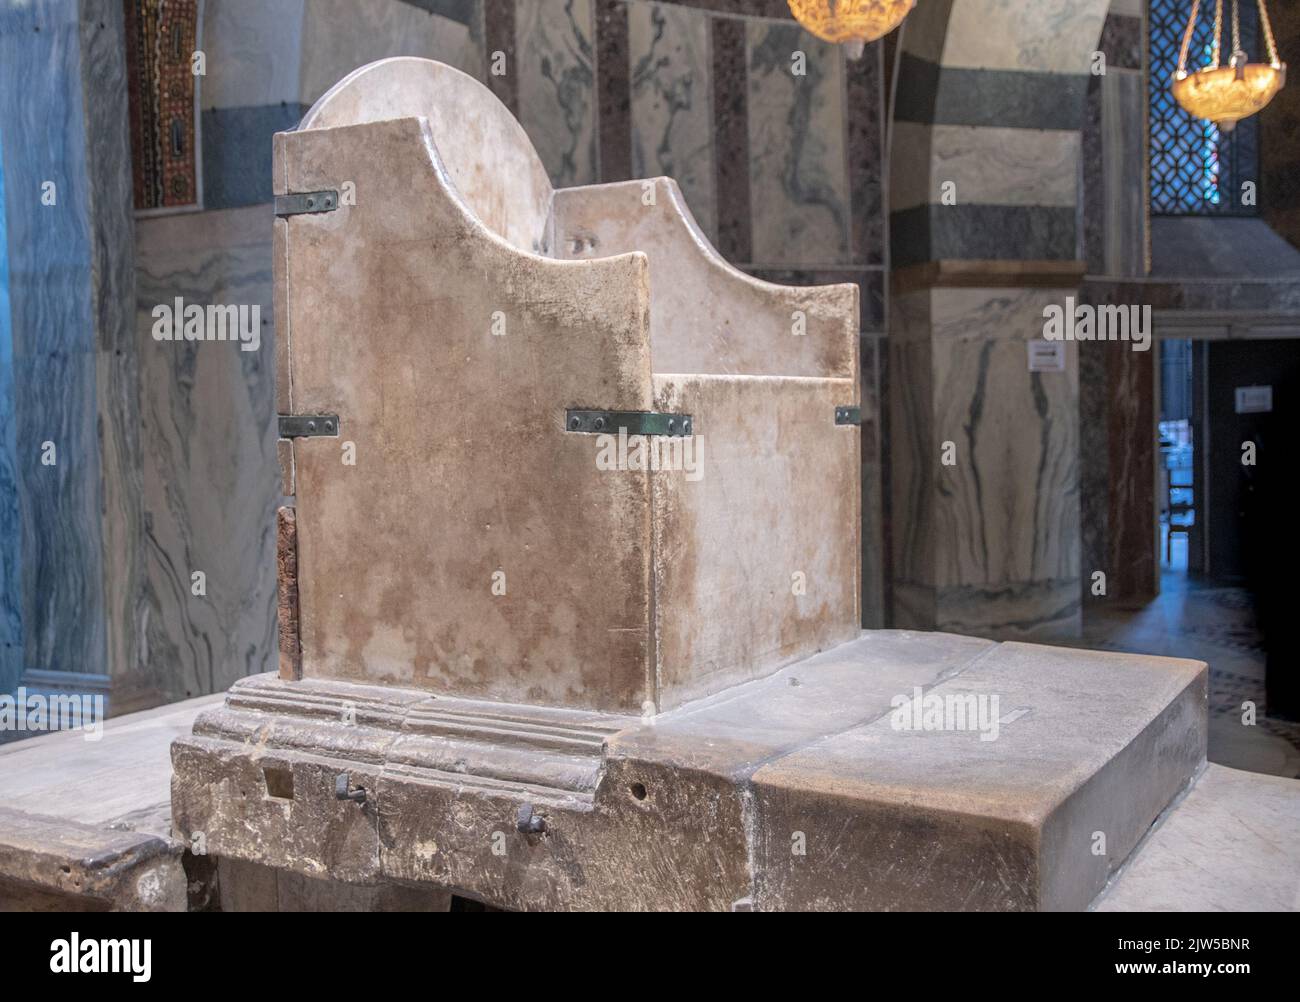 The Aachen royal throne, also known as the throne of Charlemagne, is a throne erected in the 790s on behalf of Emperor Charlemagne, which forms the Stock Photo